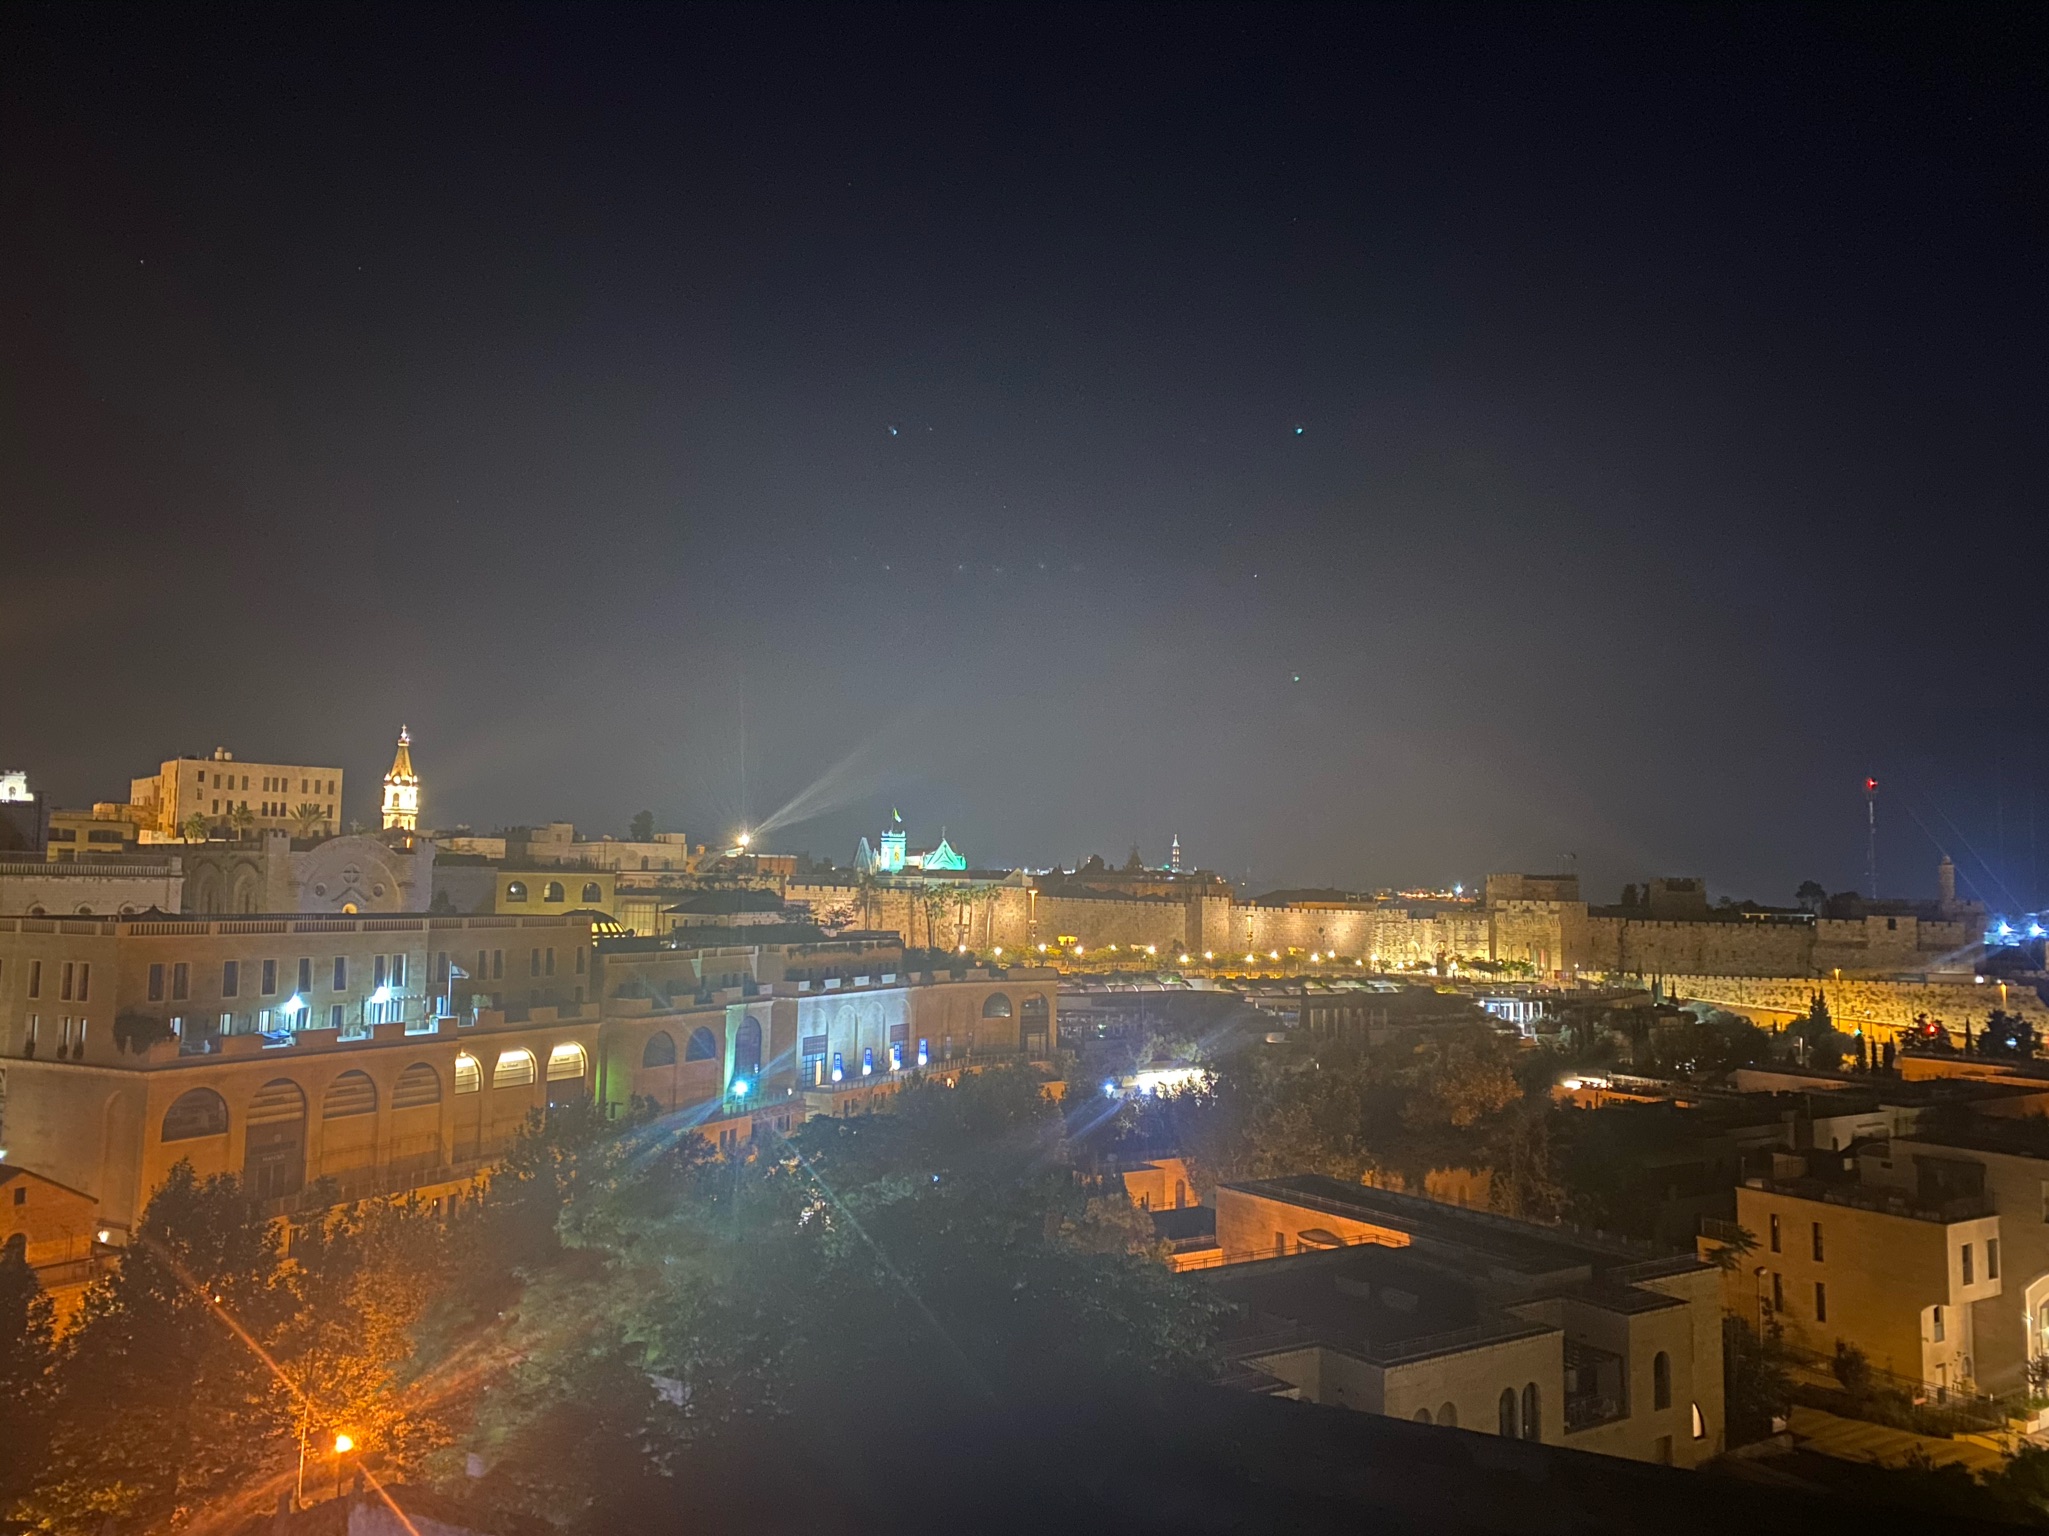 Jerusalem is quiet and beautiful in the evening